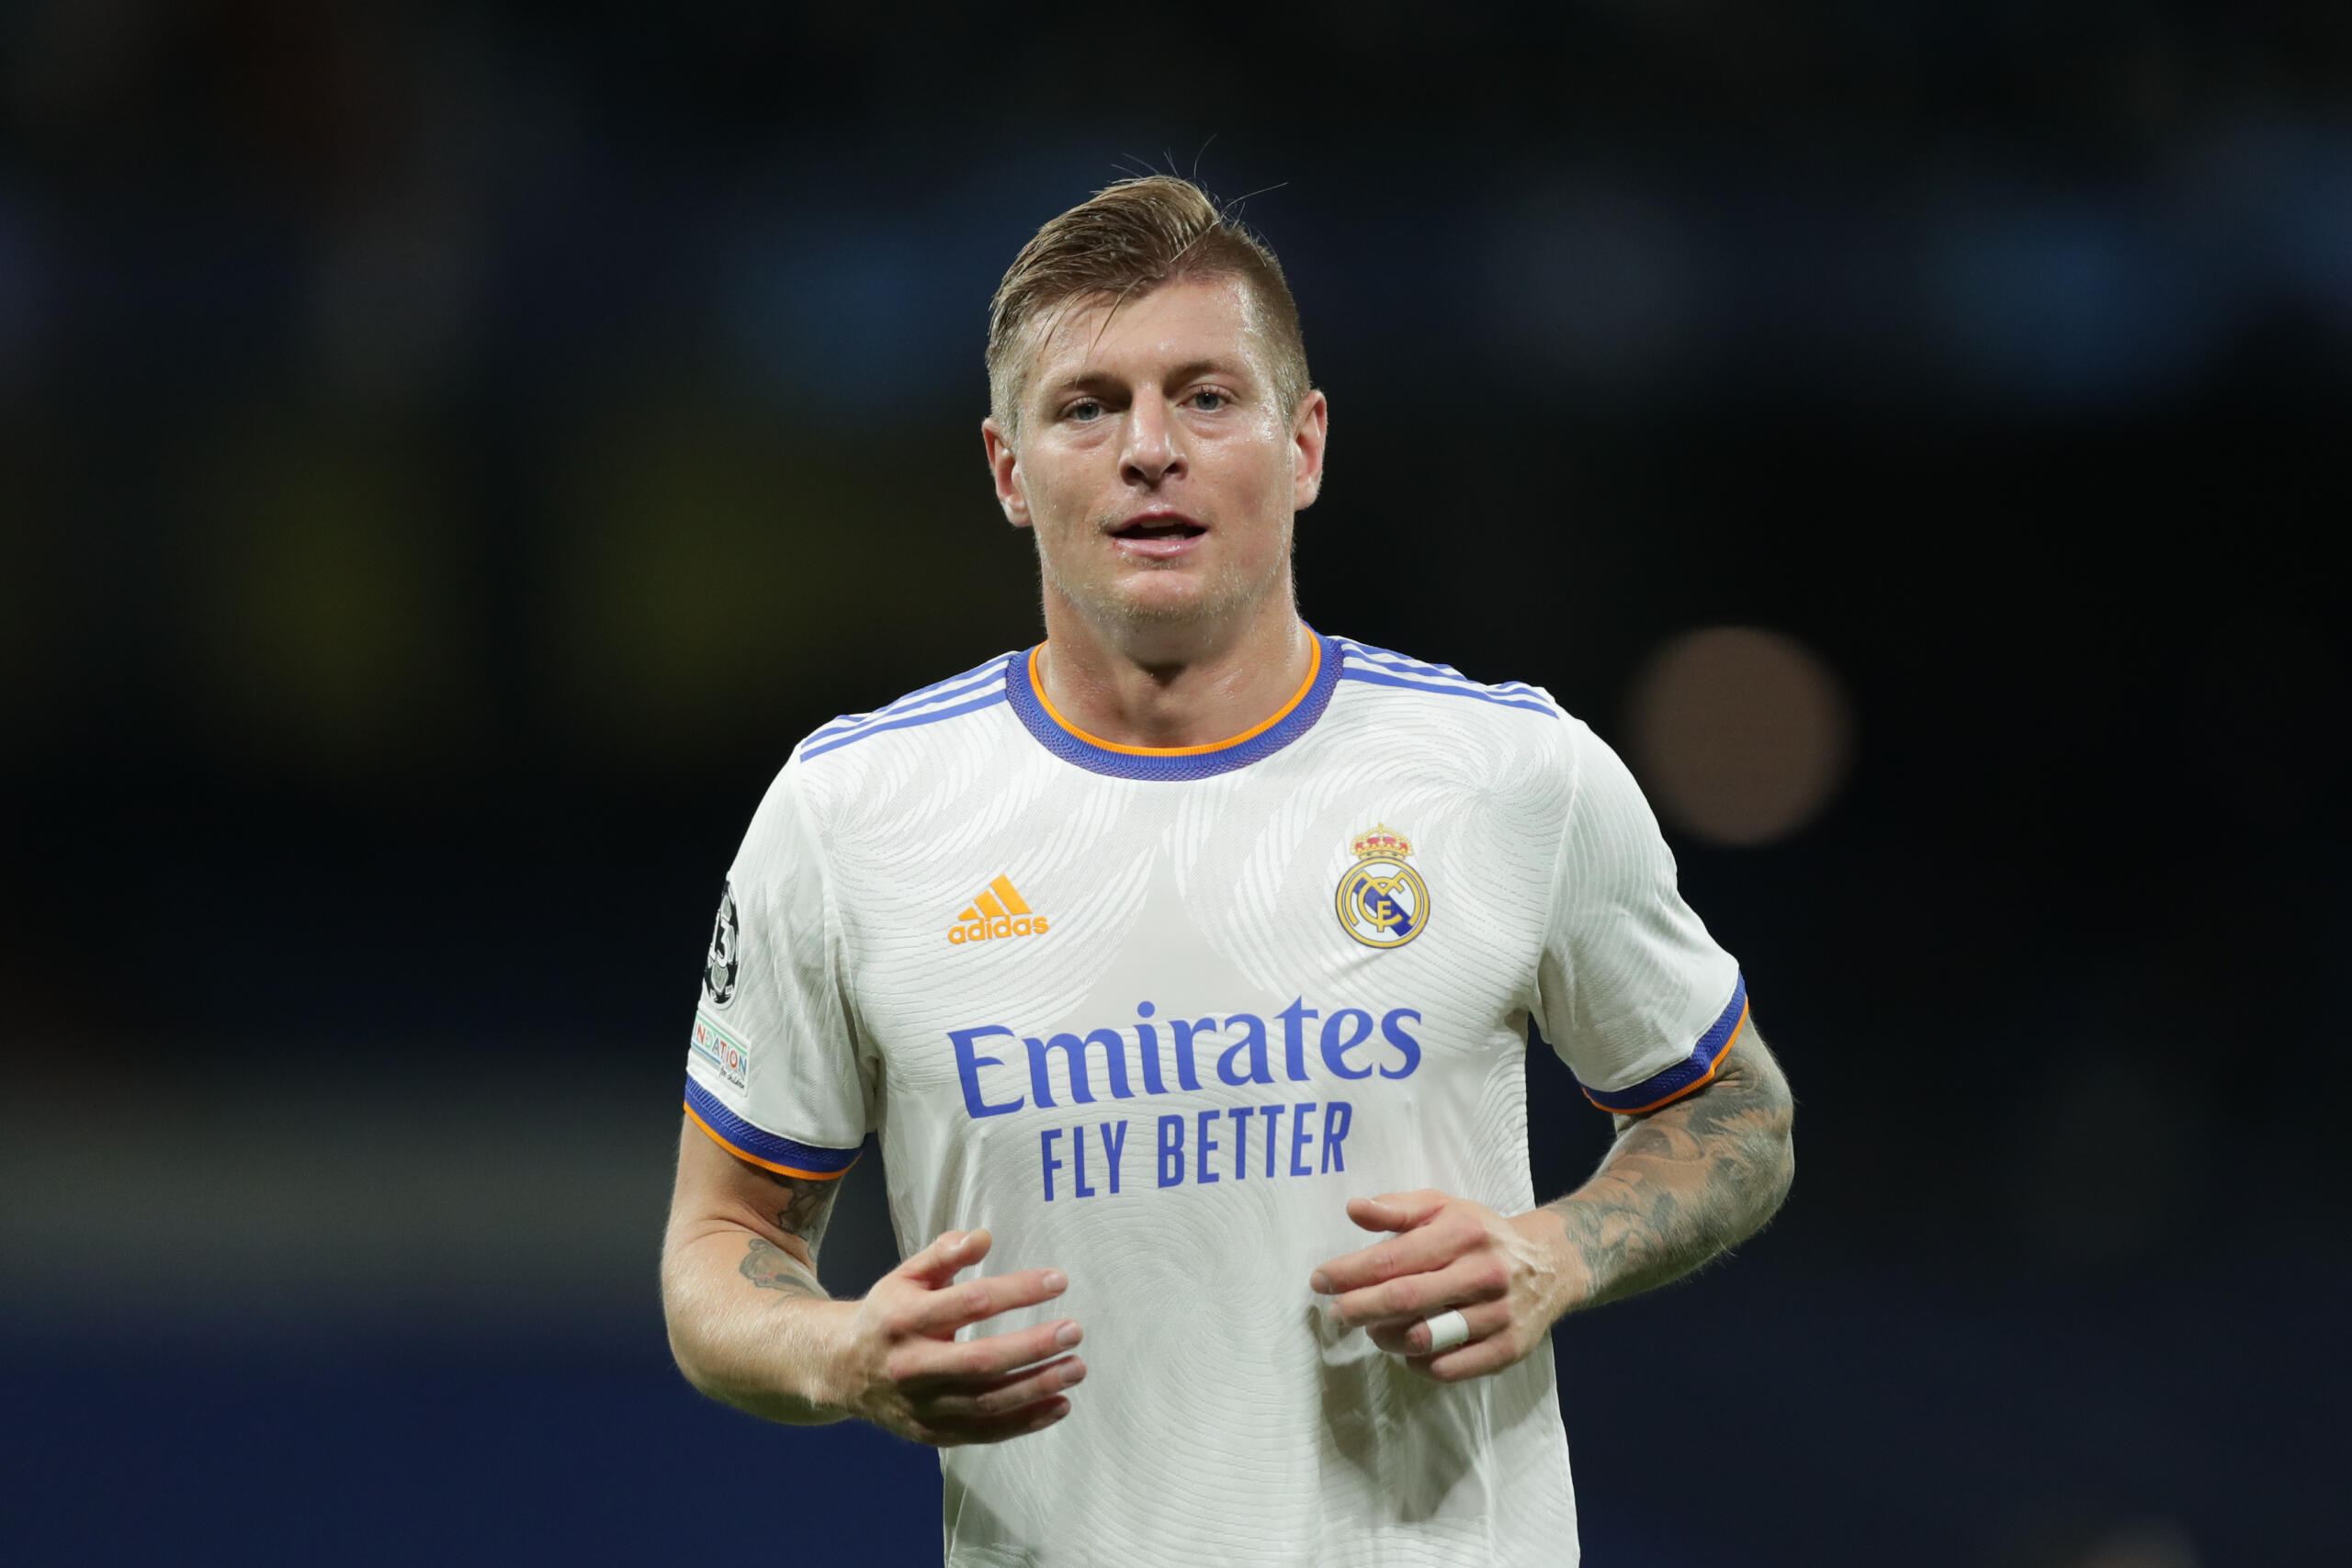 Juventus are looking for experience and set sights on two stars potentially out of contract in June, Toni Kroos and Jorginho.